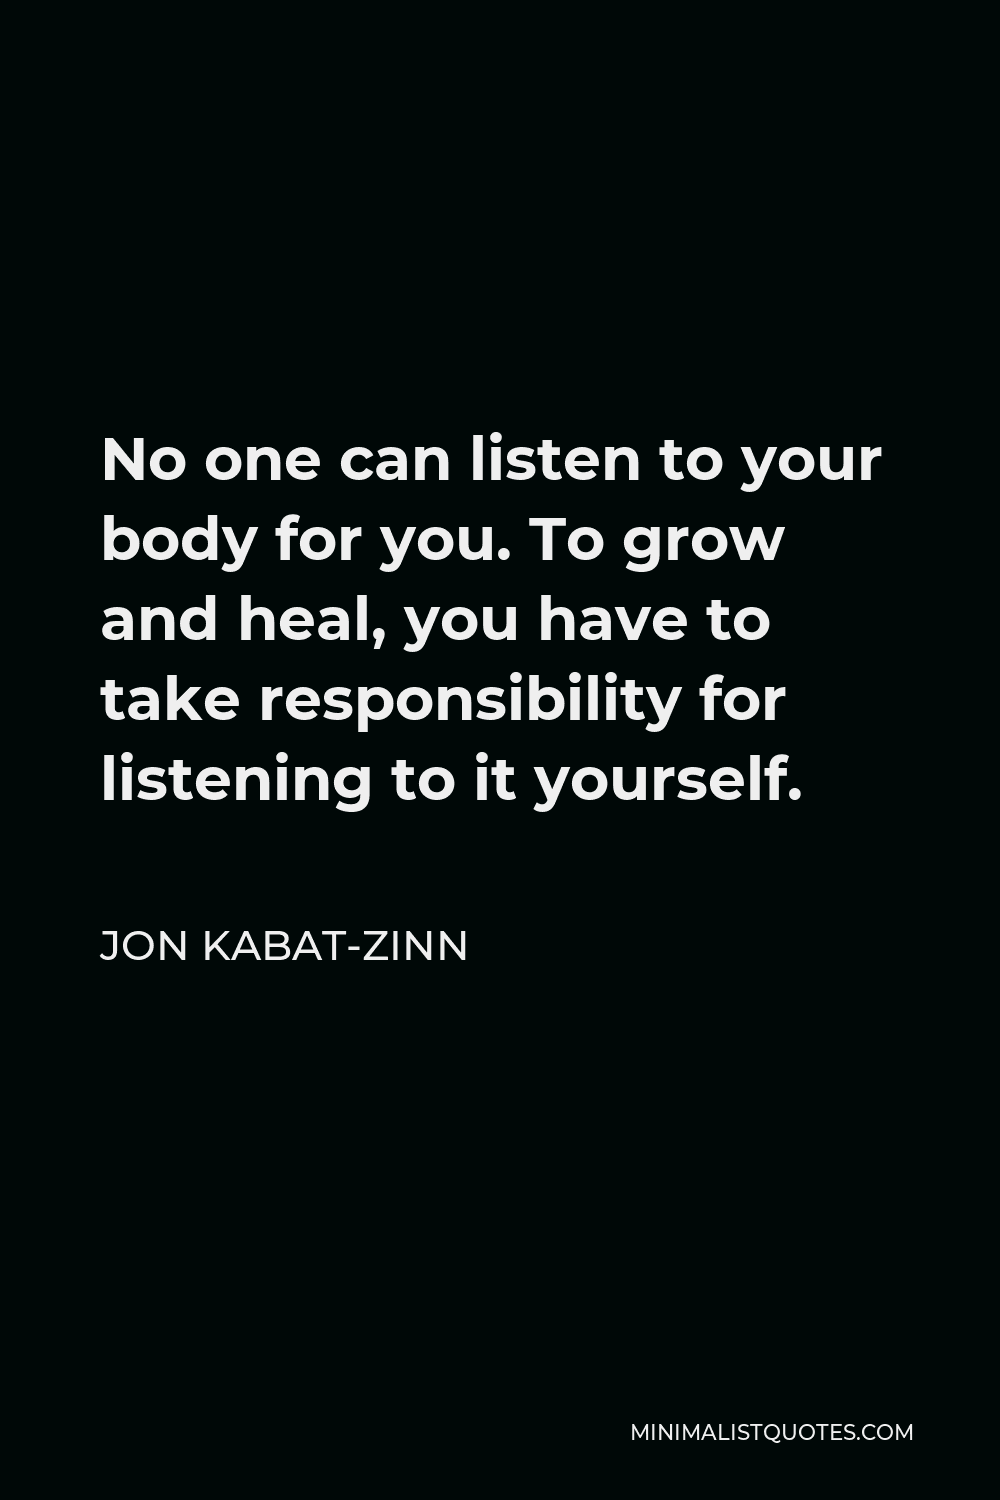 Jon Kabat-Zinn Quote - No one can listen to your body for you. To grow and heal, you have to take responsibility for listening to it yourself.